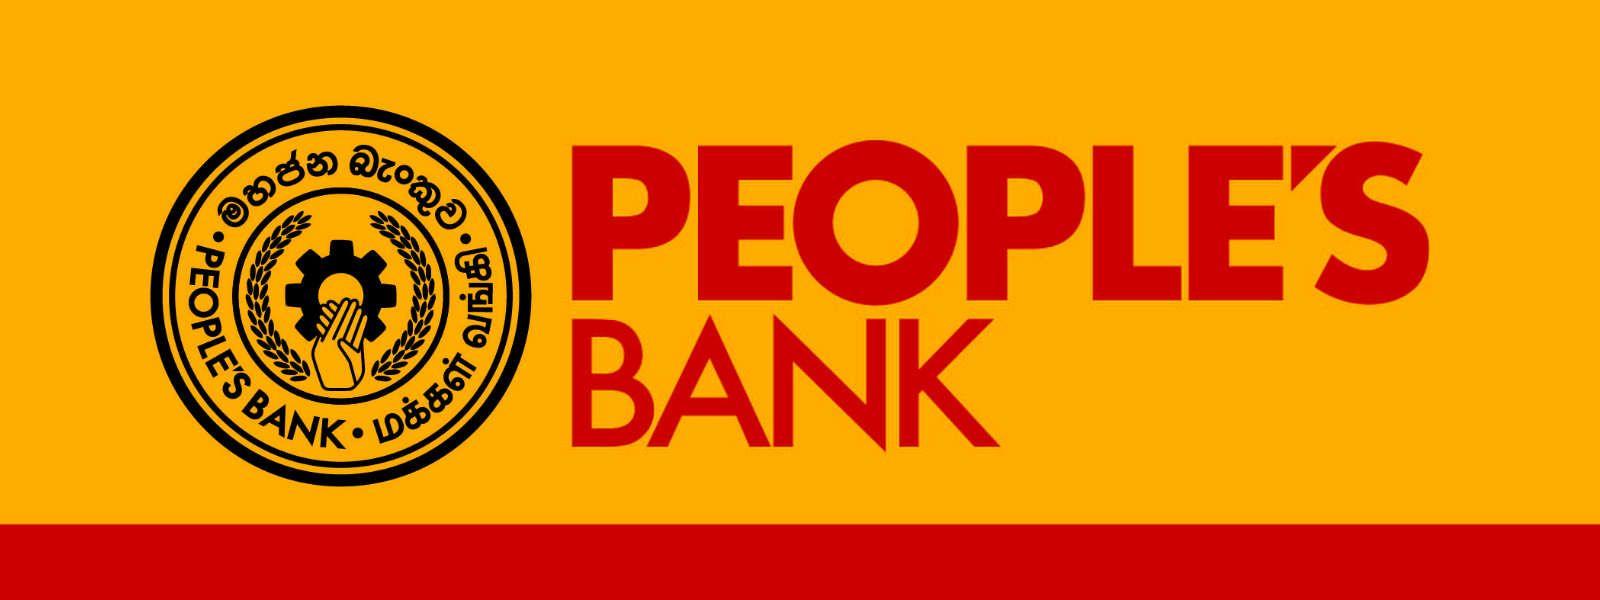 Peoples Bank Logo - People's bank being looted with political patronage - Sri Lanka ...